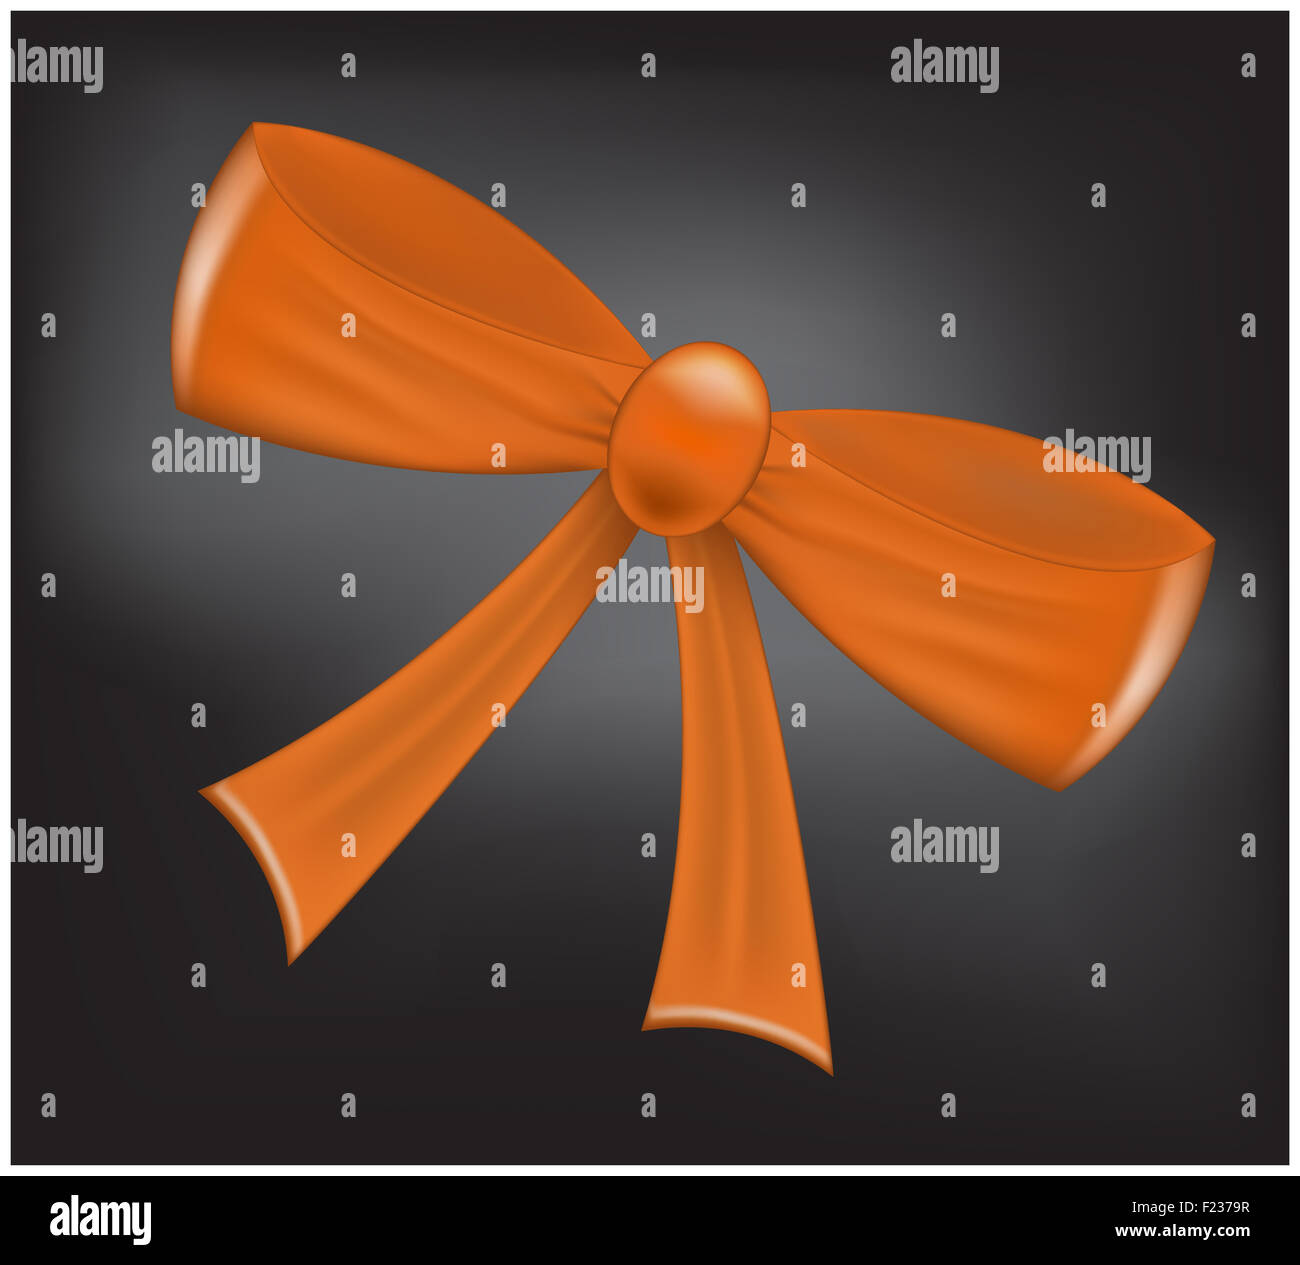 Ribbon Bow Images – Browse 1,830,748 Stock Photos, Vectors, and